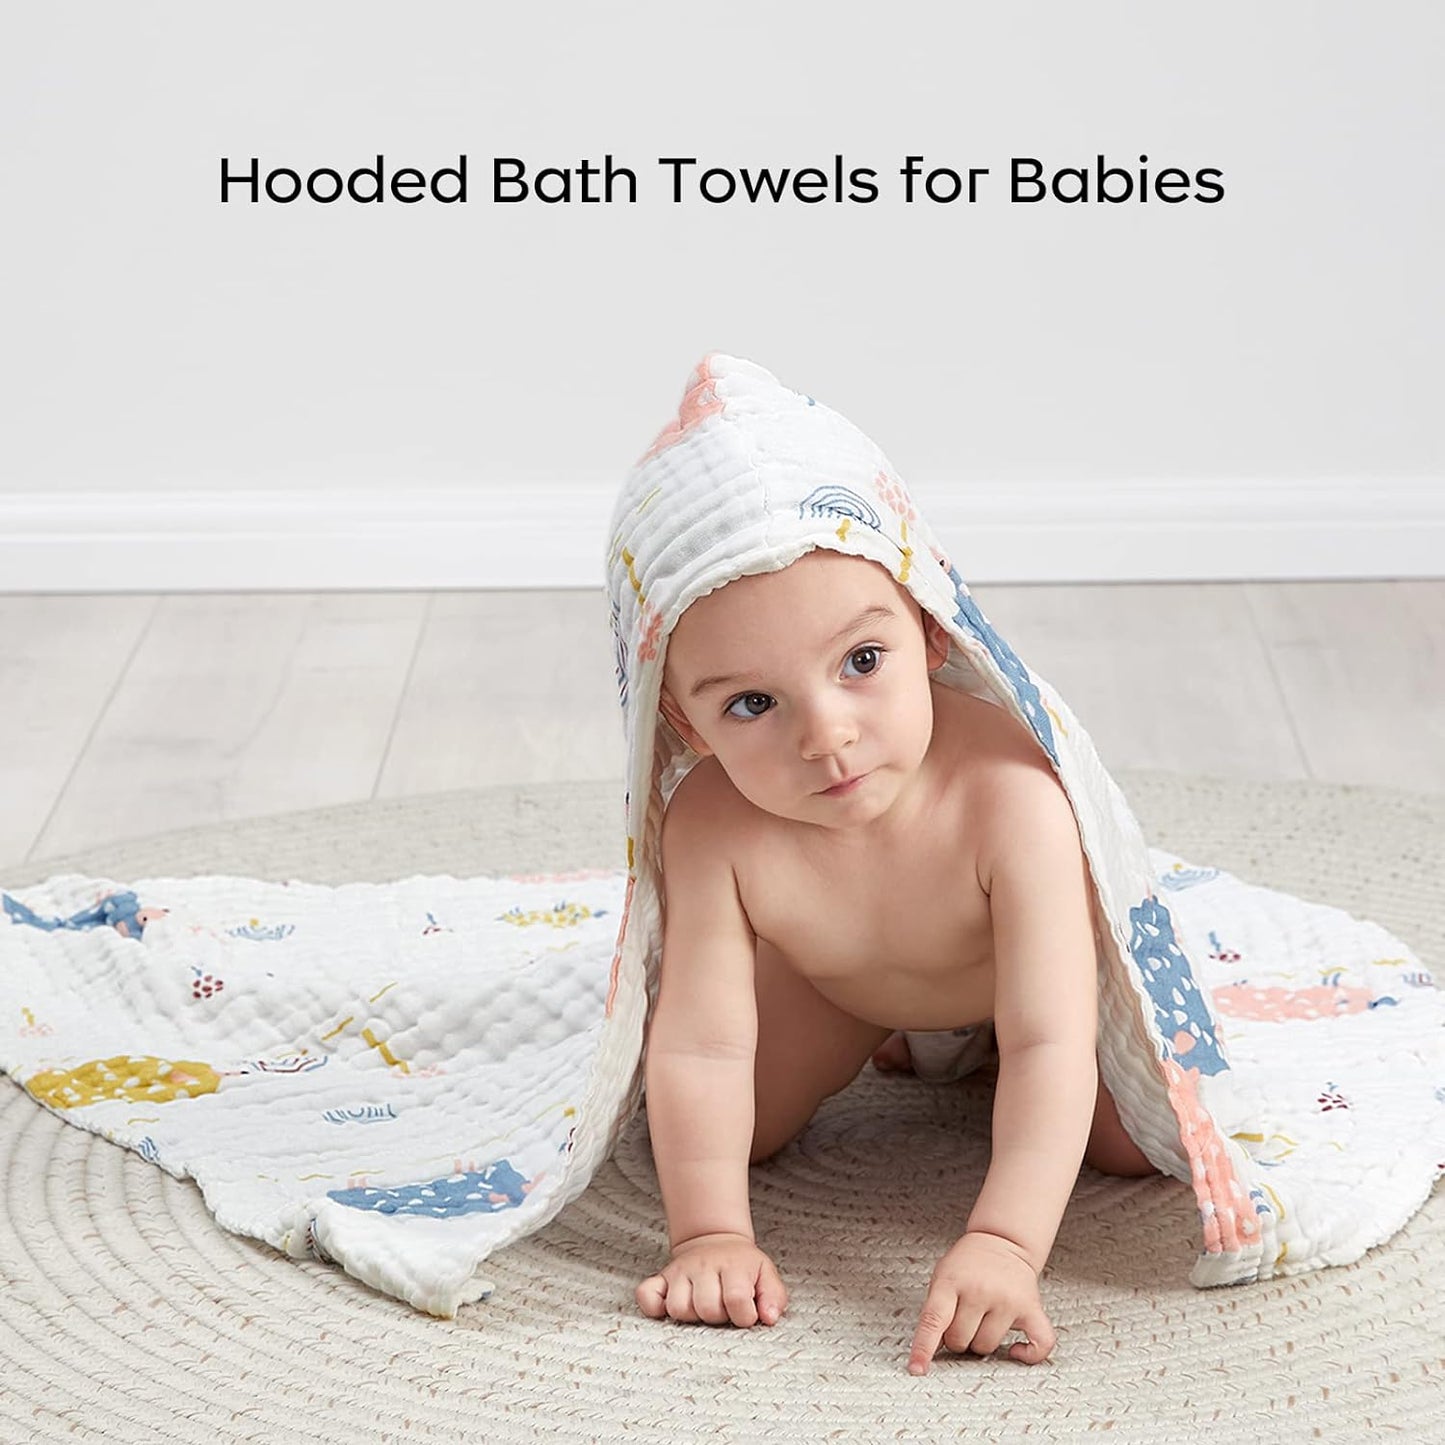 bc babycare Baby Bath Towel,100% Cotton Muslin Infant Towels, Baby Towels for Newborn Infant Bath Towels, Super Absorbent Hooded Baby Towels for Babies 2 Set, 37.4 * 37.4 Inch